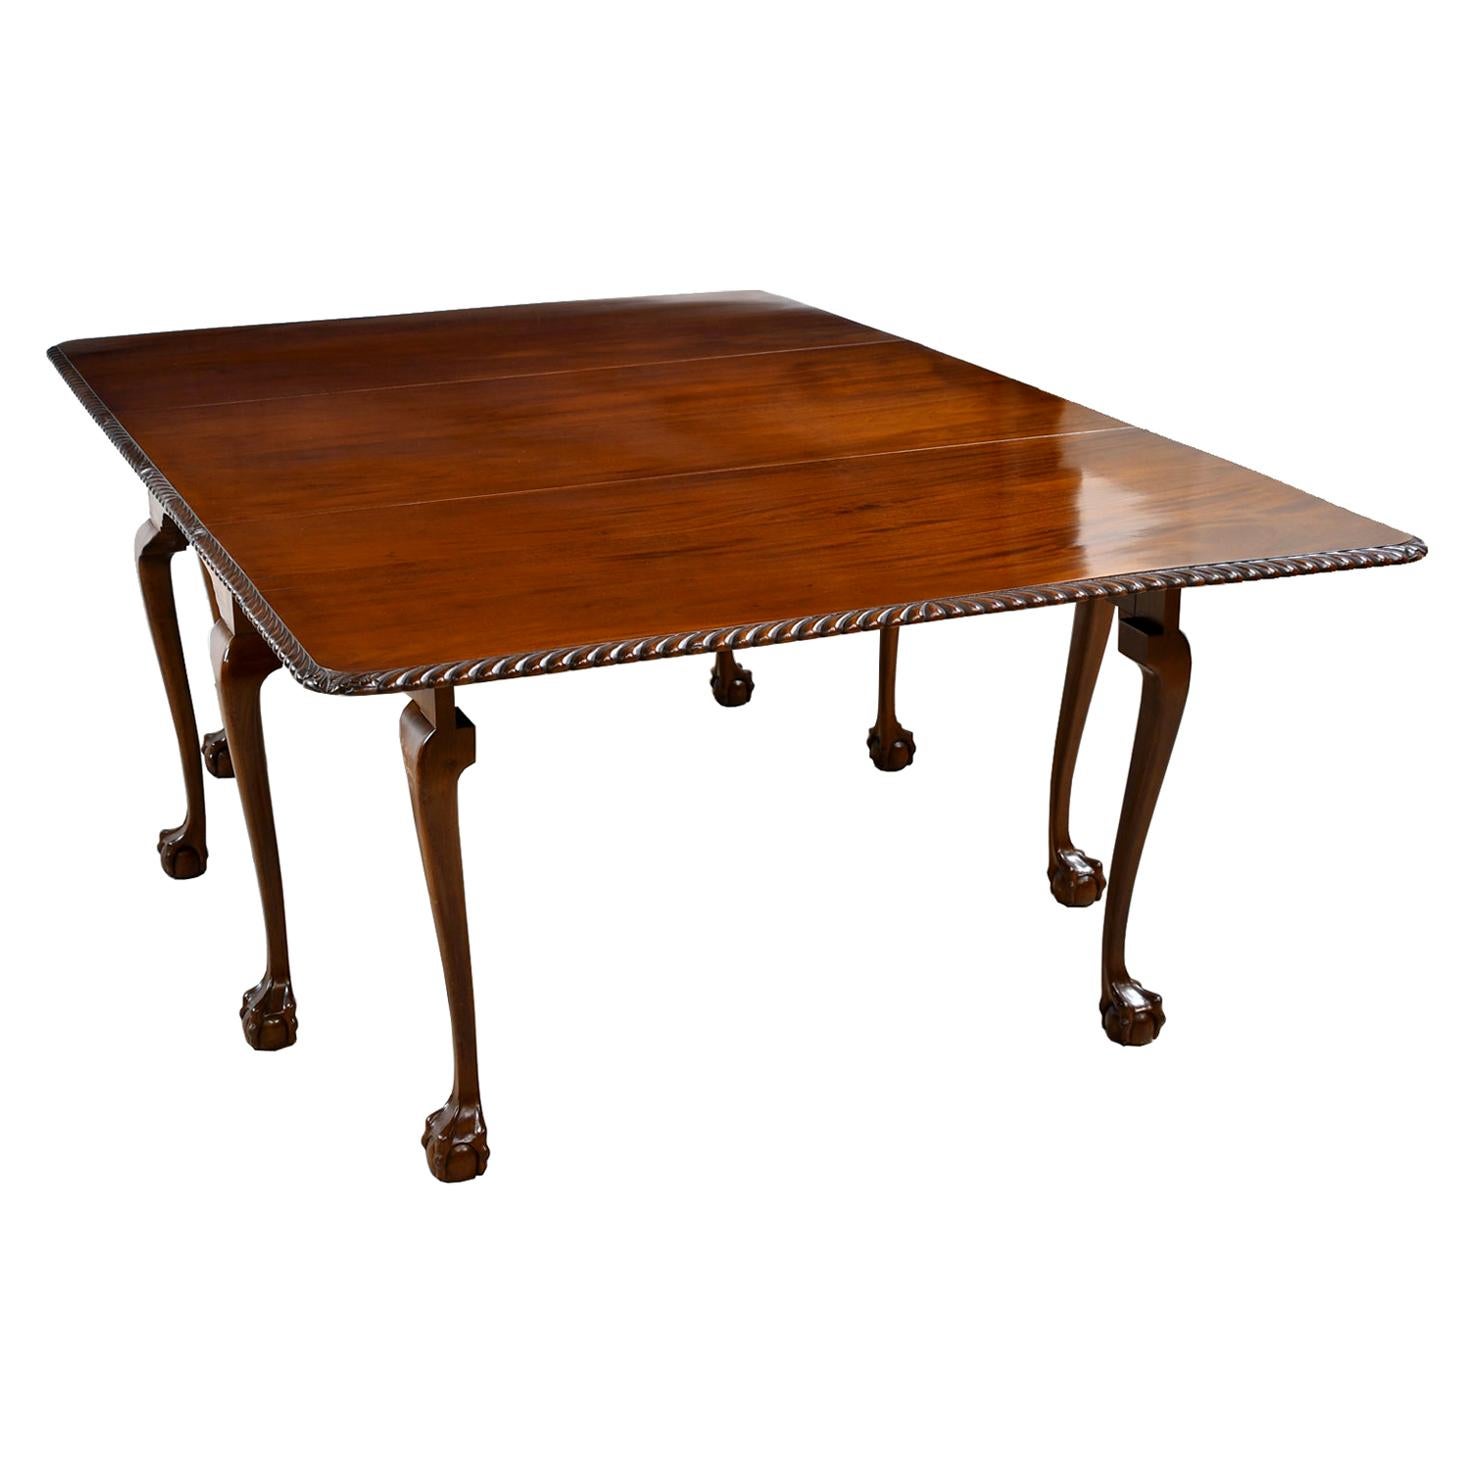 Large Centennial Queen Anne-Style Drop-Leaf Dining Table Philadelphia circa 1880